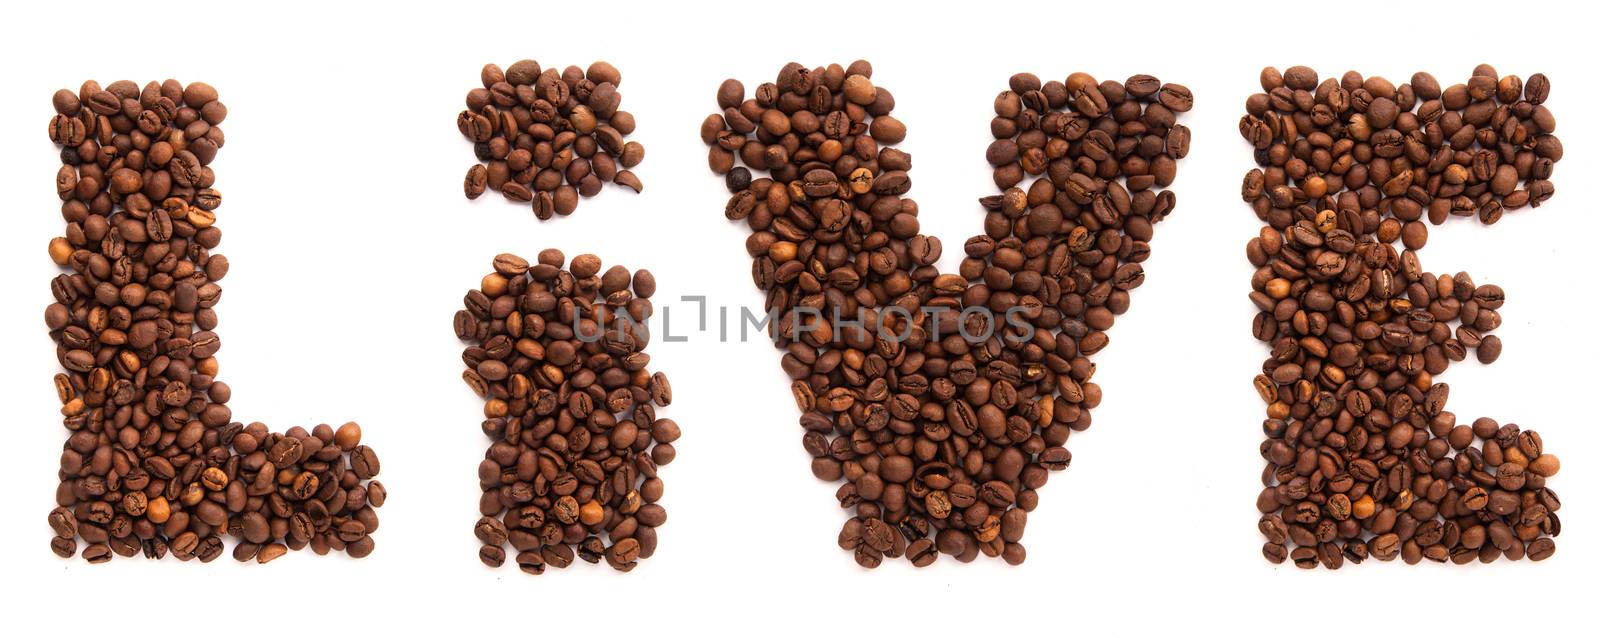 Live inscription from roasted coffee beans isolated on white background